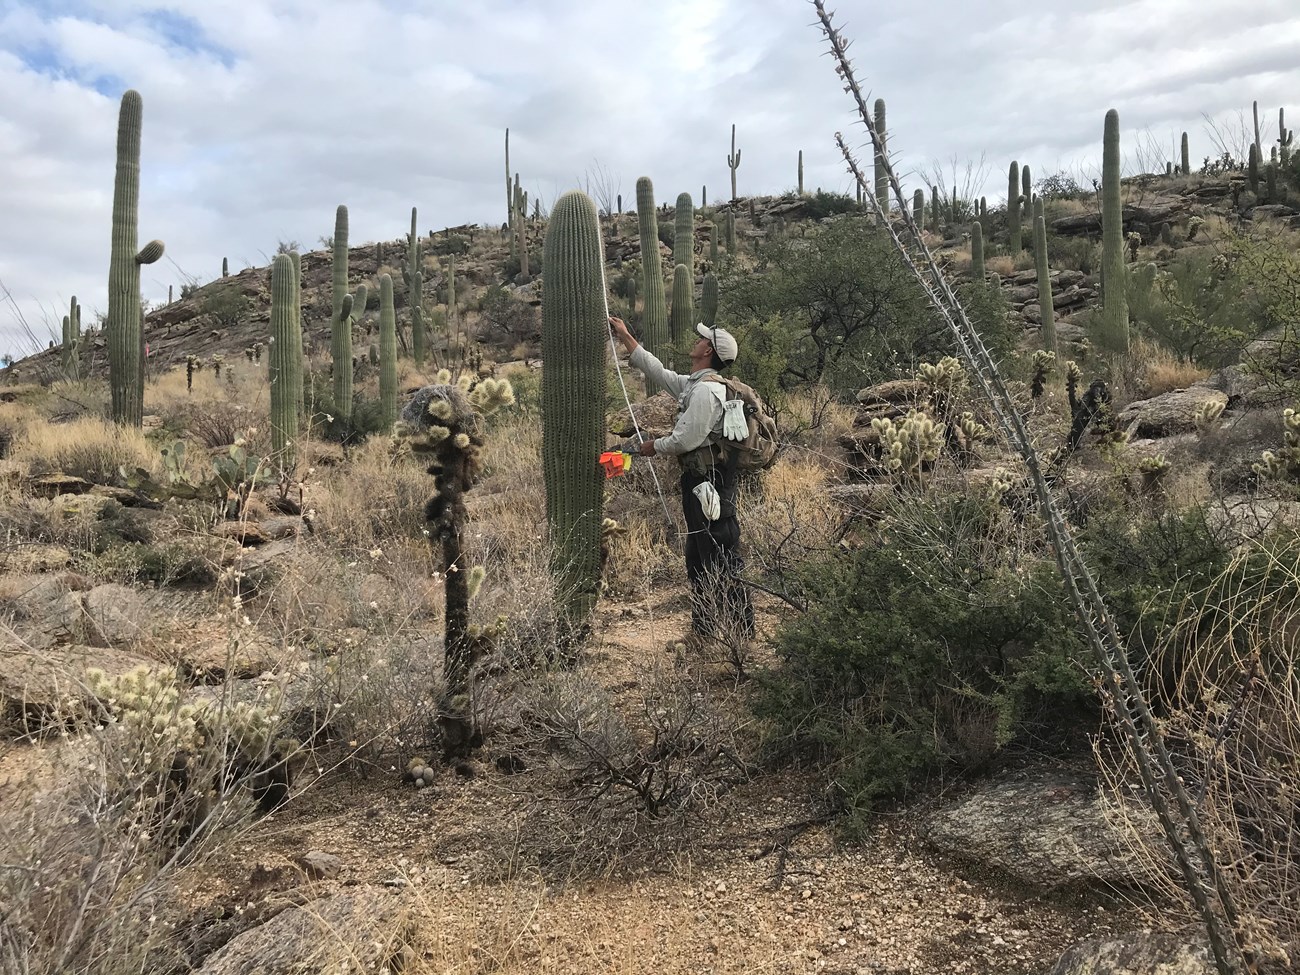 A man measuring the height of a saguaro using a meter stick